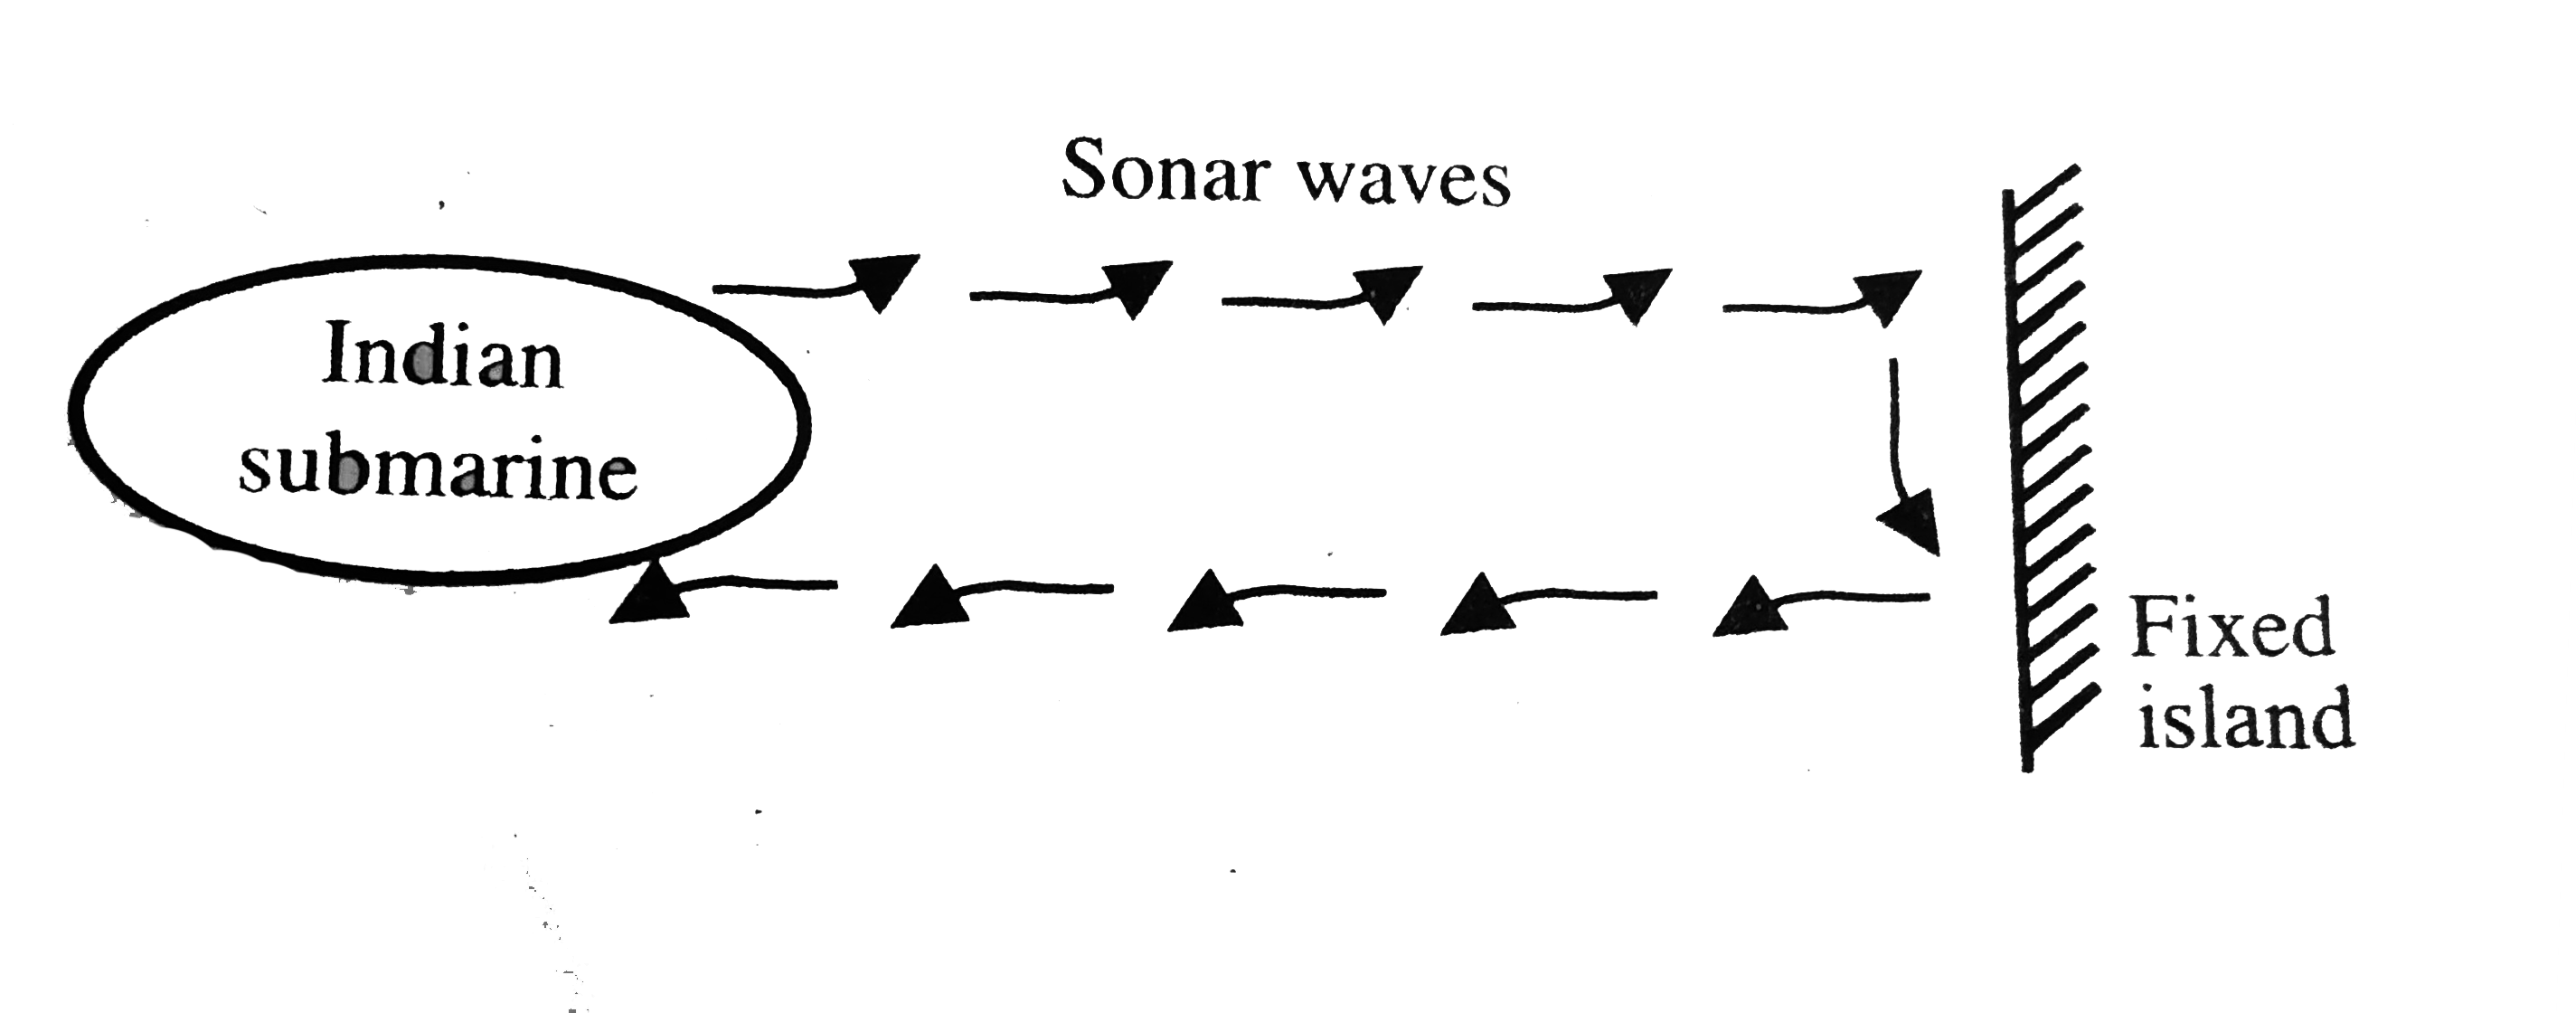 An indian submarine is moving in the Arabian sea with constant velocity. To detect enemy it sends out sonar waves which travel with velocity 1050(m)/(s) in water. Initially the waves are getting reflected from a fixed island and the reflected waves are coming back to submarine. The frequency of reflected waves are detected by the submarine and found to be 10% greater than the sent waves.   Now an enemy ship comes in front, due to which the frequency of reflected waves detected by submarine becomes 21% greater than the sent waves.   Q If the wavelength received by enemy ship is lamda' and wavelength of reflected waves received by submarine is lamda'', then ((lamda')/(lamda'')) equals